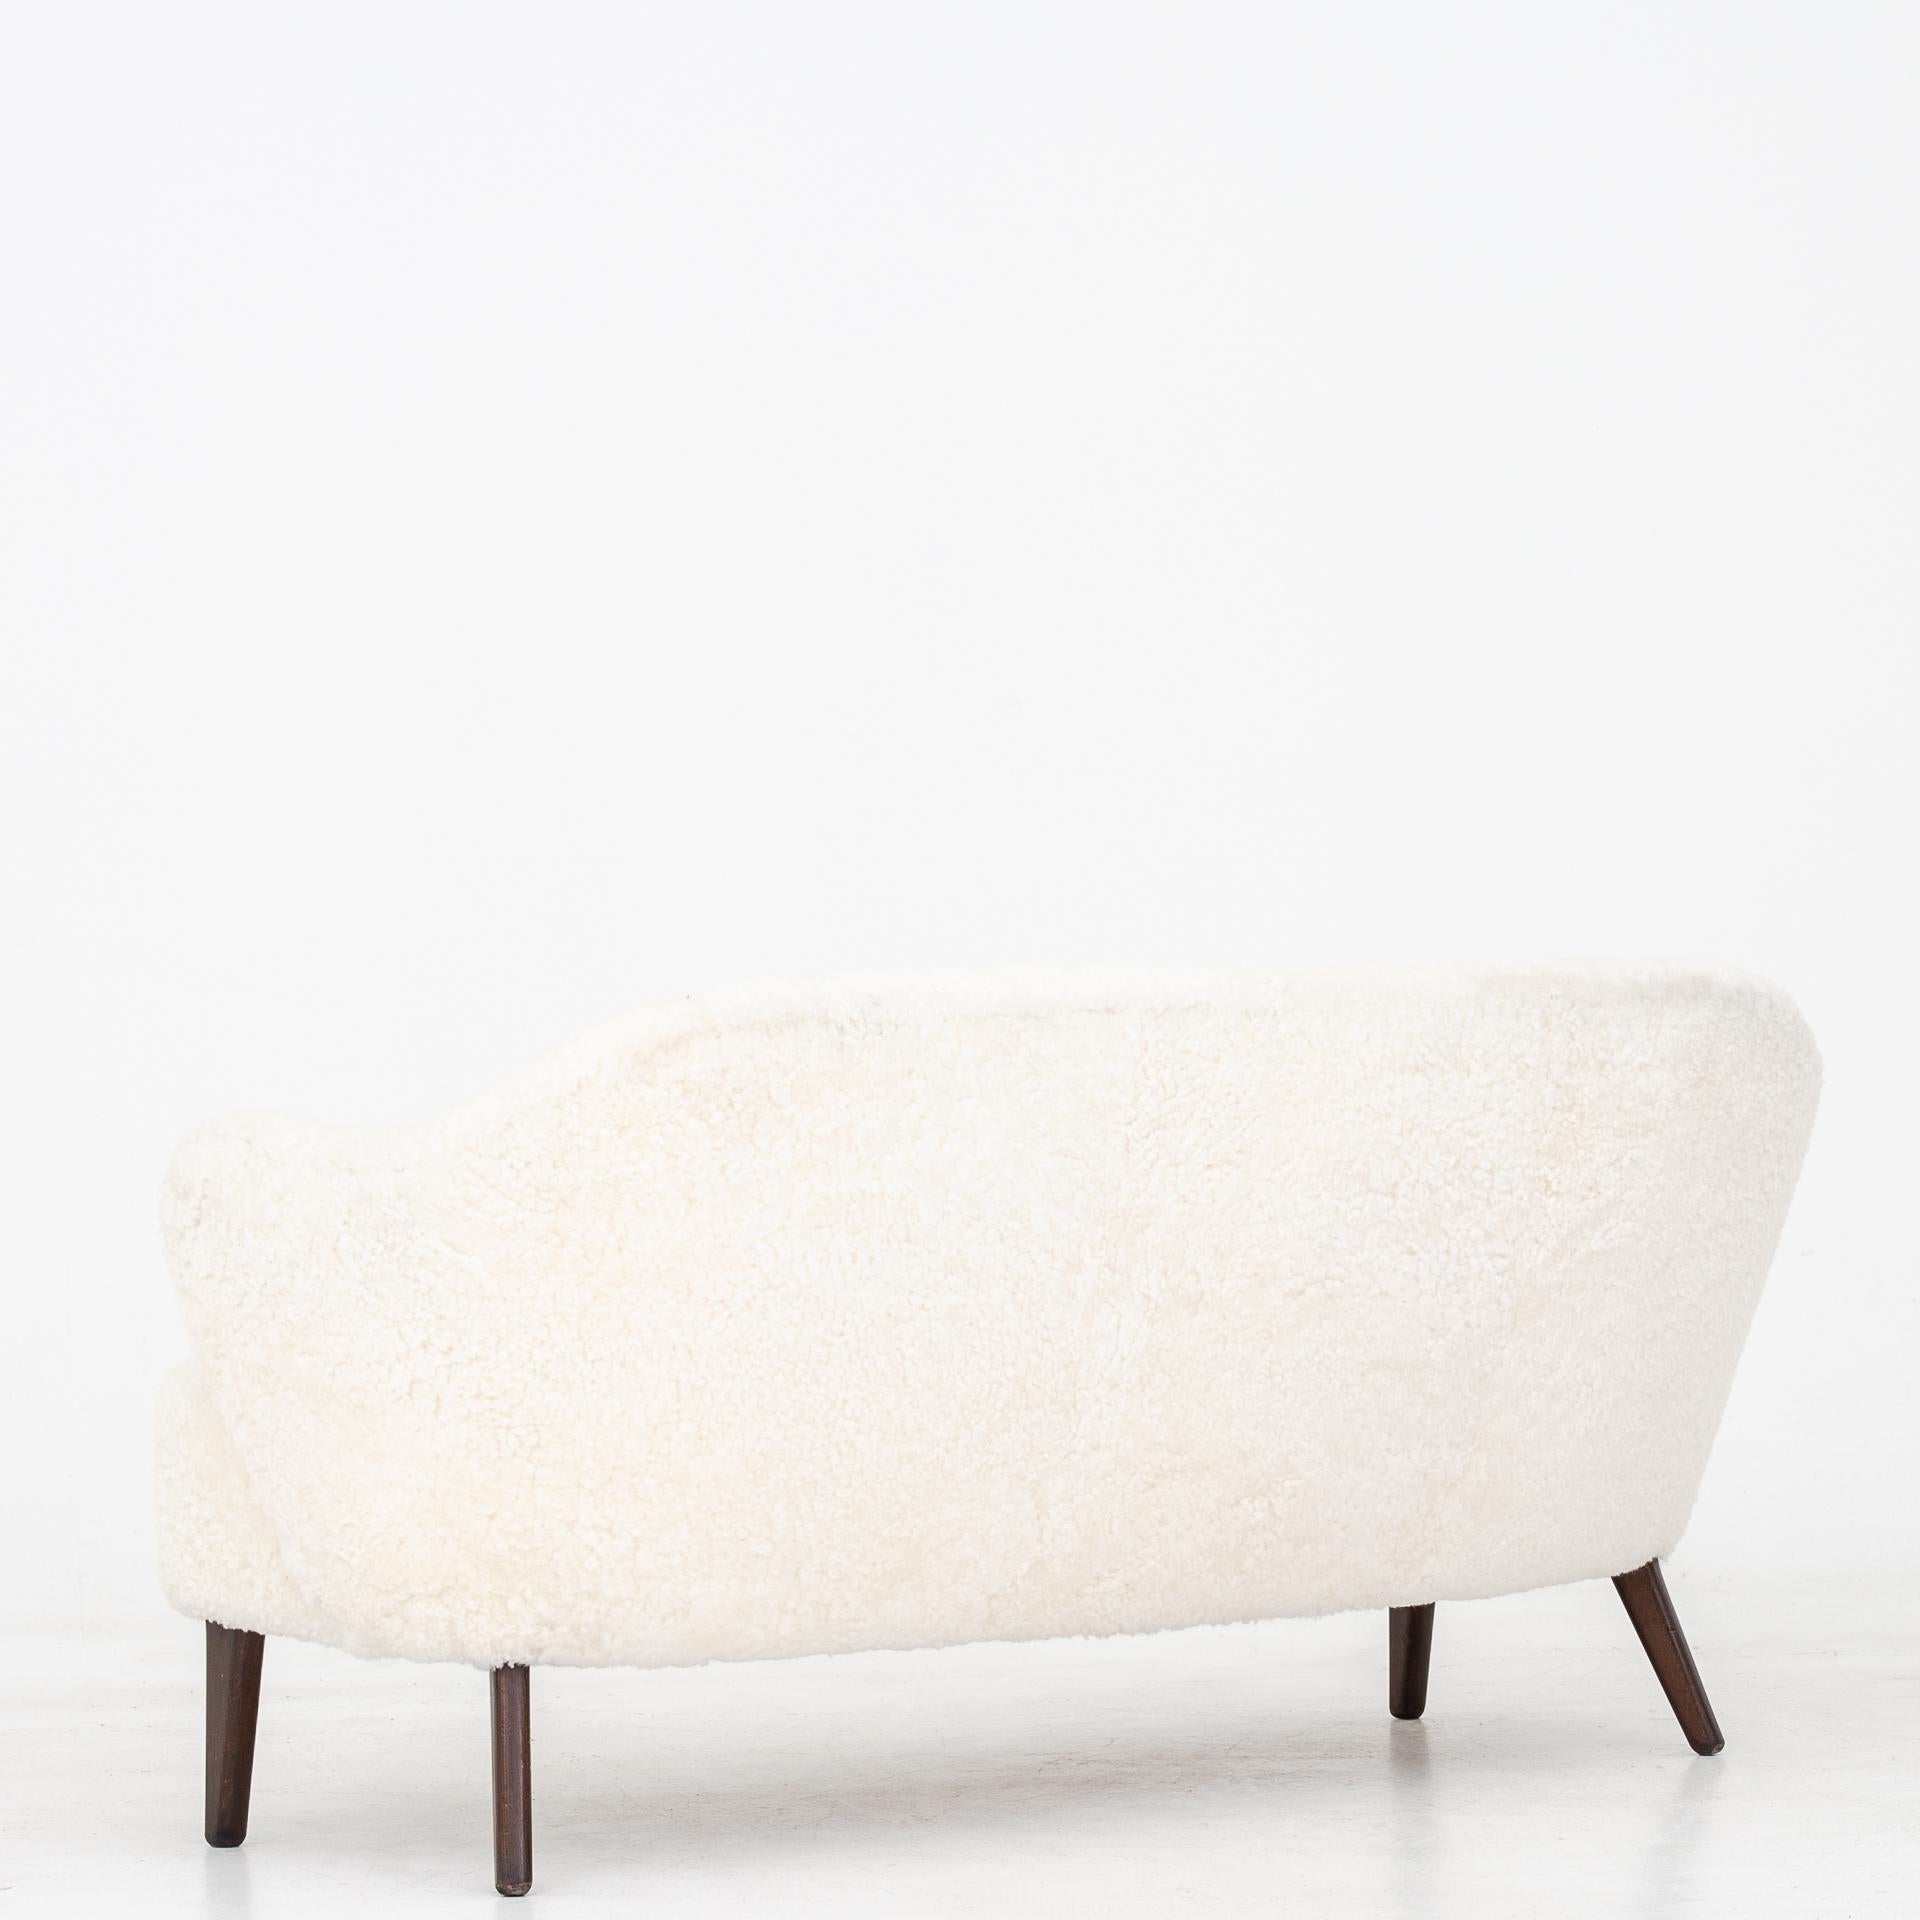 Rare sofa in lambs wool with legs of oak and beech. Designed circa 1940. Maker Jacob Kjær.